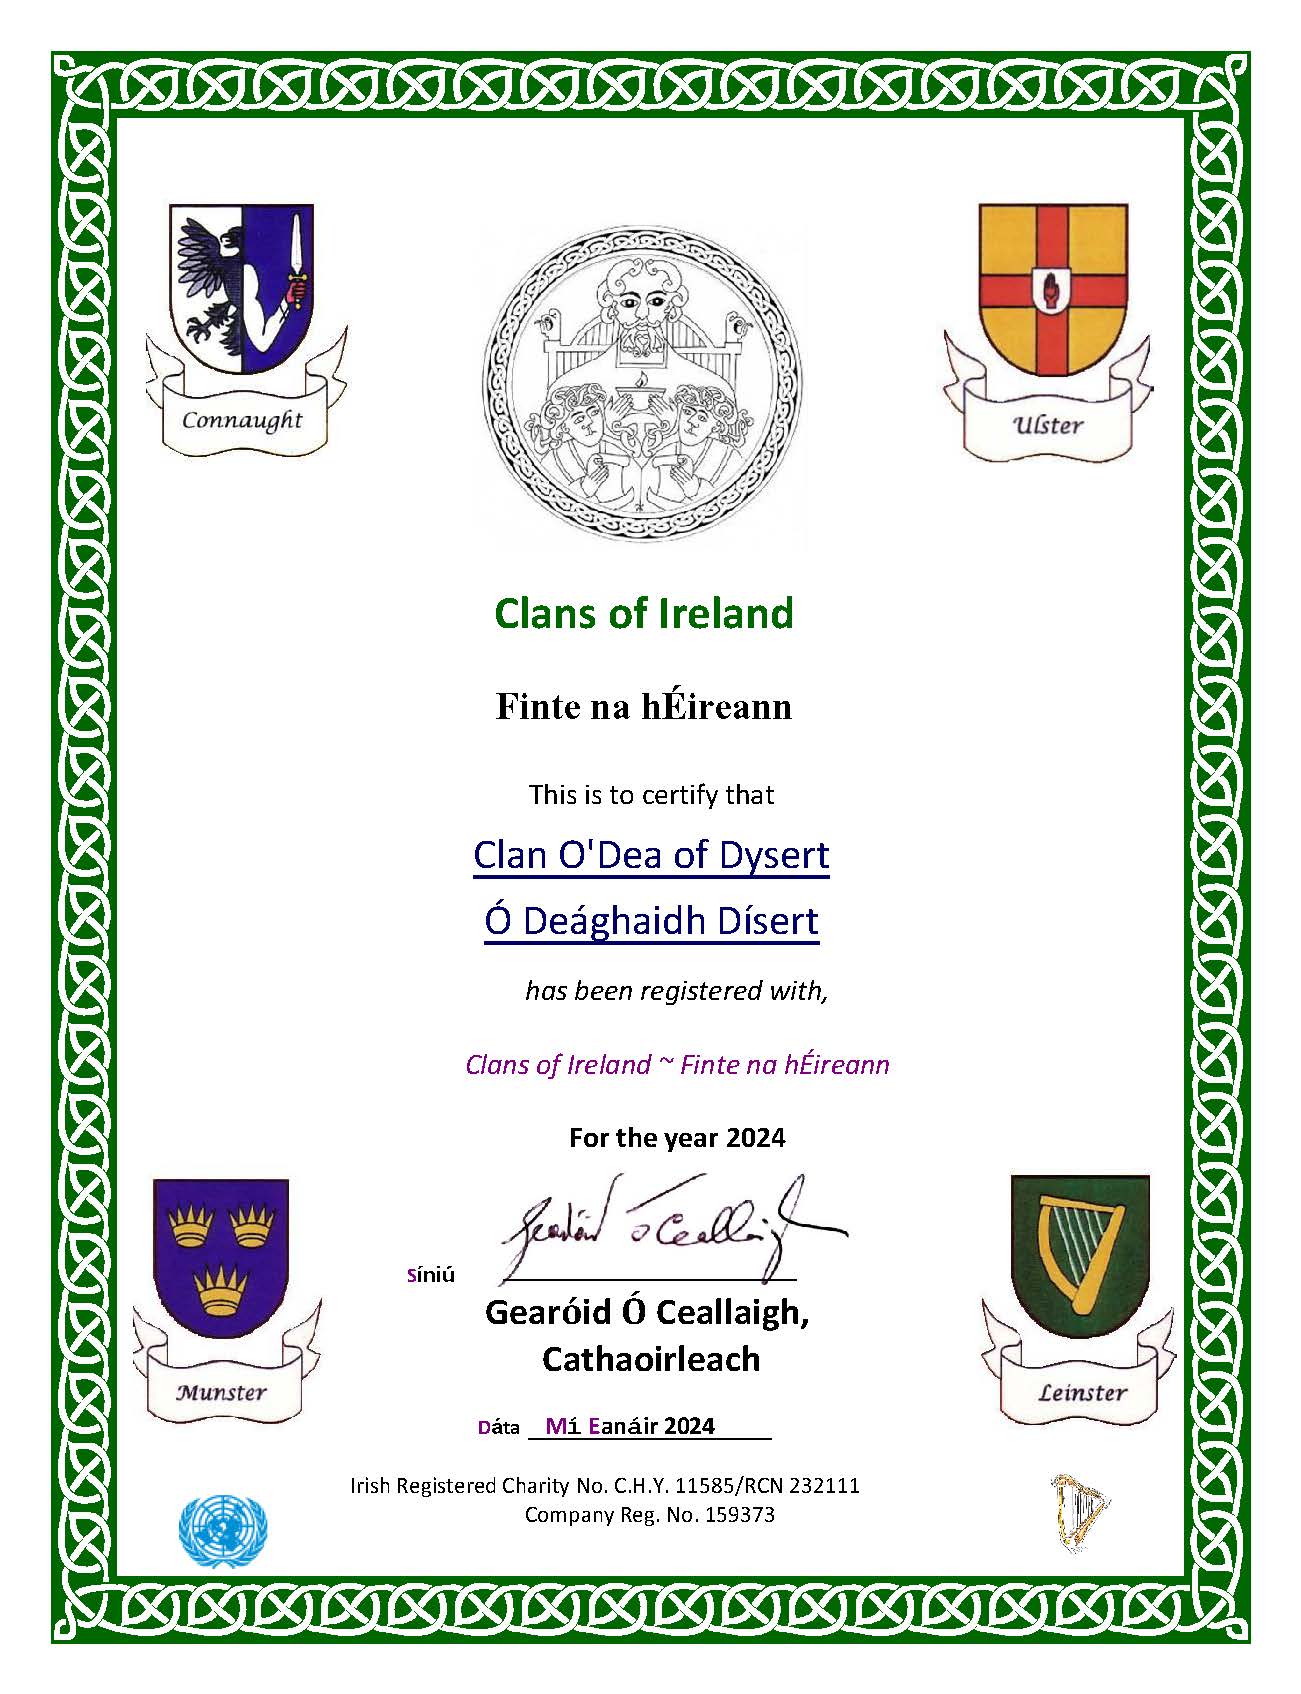 The Dysert O'Dea Clan is a Registered Member of the Clans of Ireland